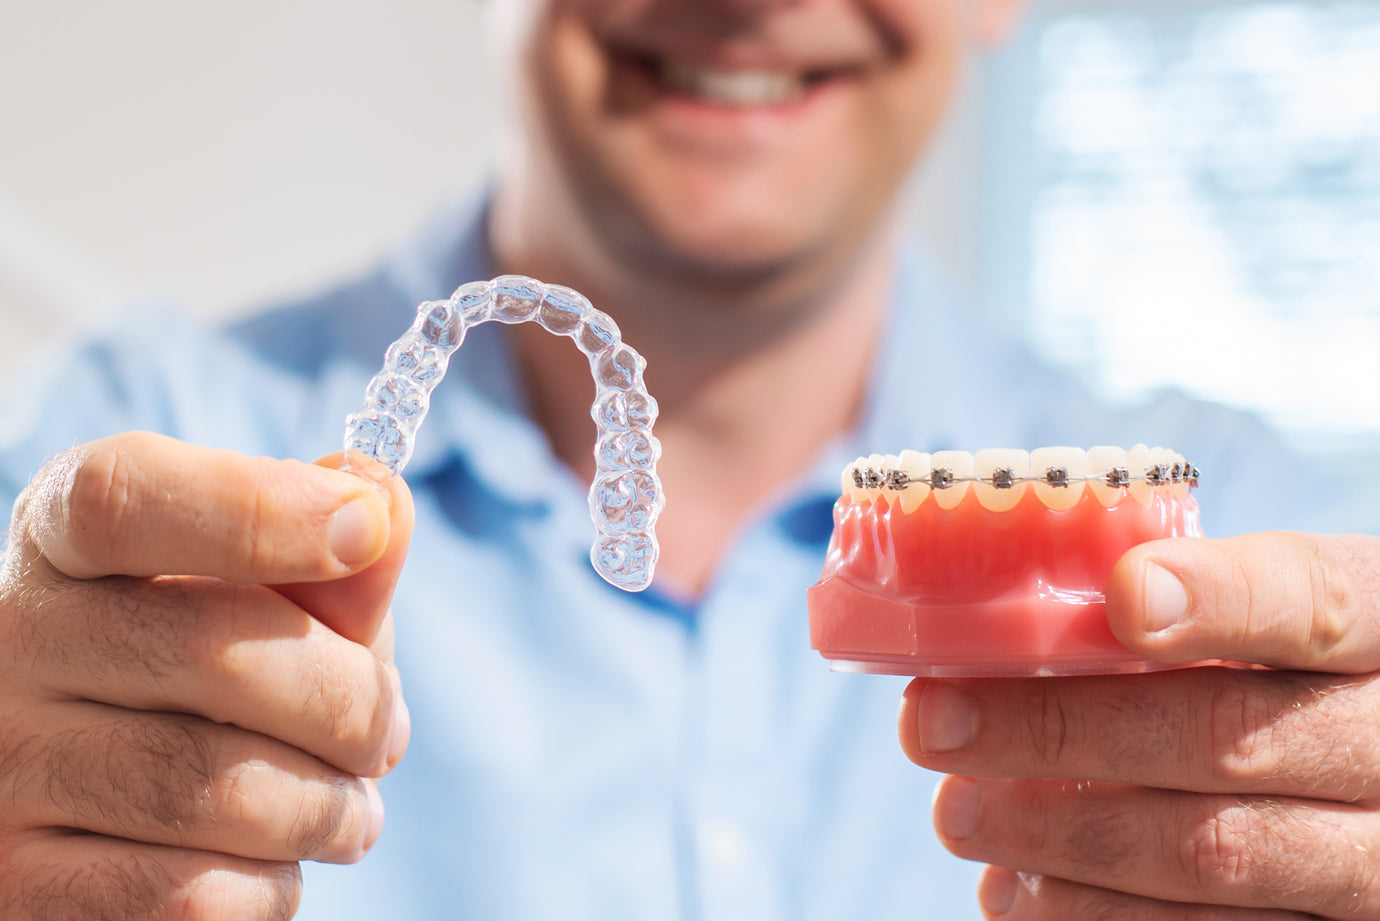 Aligners vs Braces: Choosing the Right Teeth Alignment Treatment for You